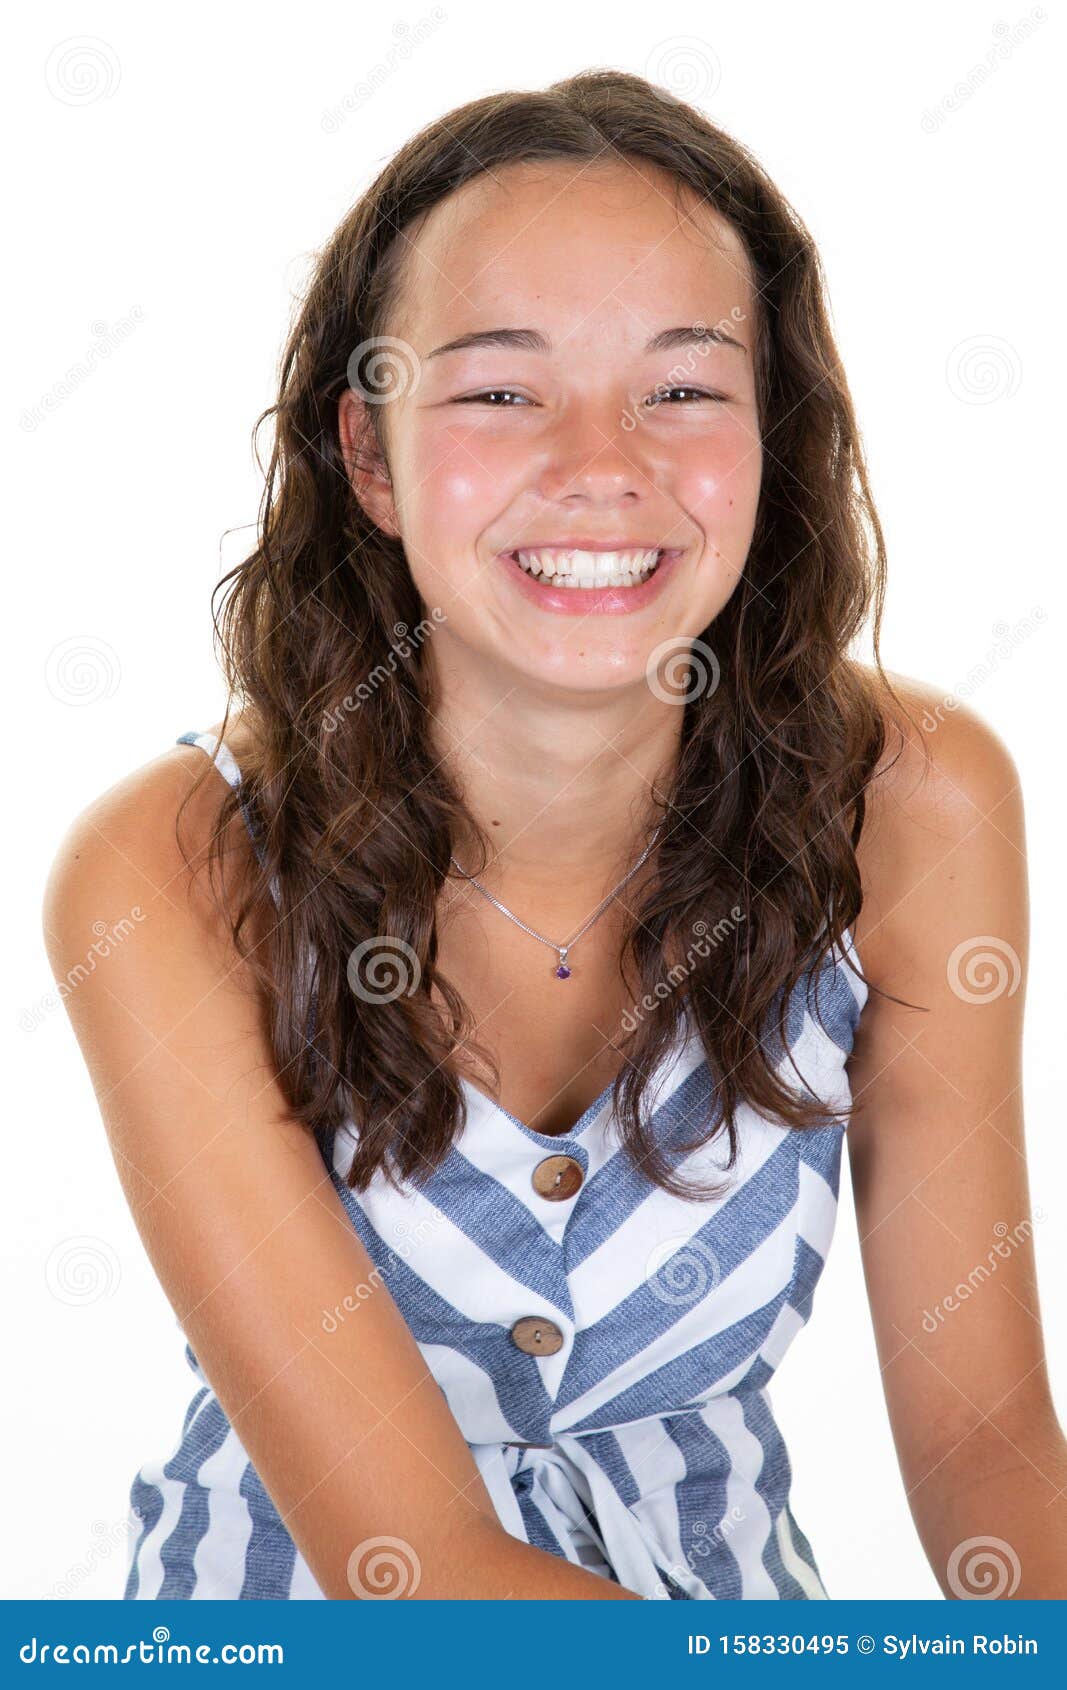 https://thumbs.dreamstime.com/z/happy-young-woman-smiling-teen-girl-white-teeth-smile-laugh-beauty-happy-young-woman-smiling-teen-girl-white-teeth-158330495.jpg